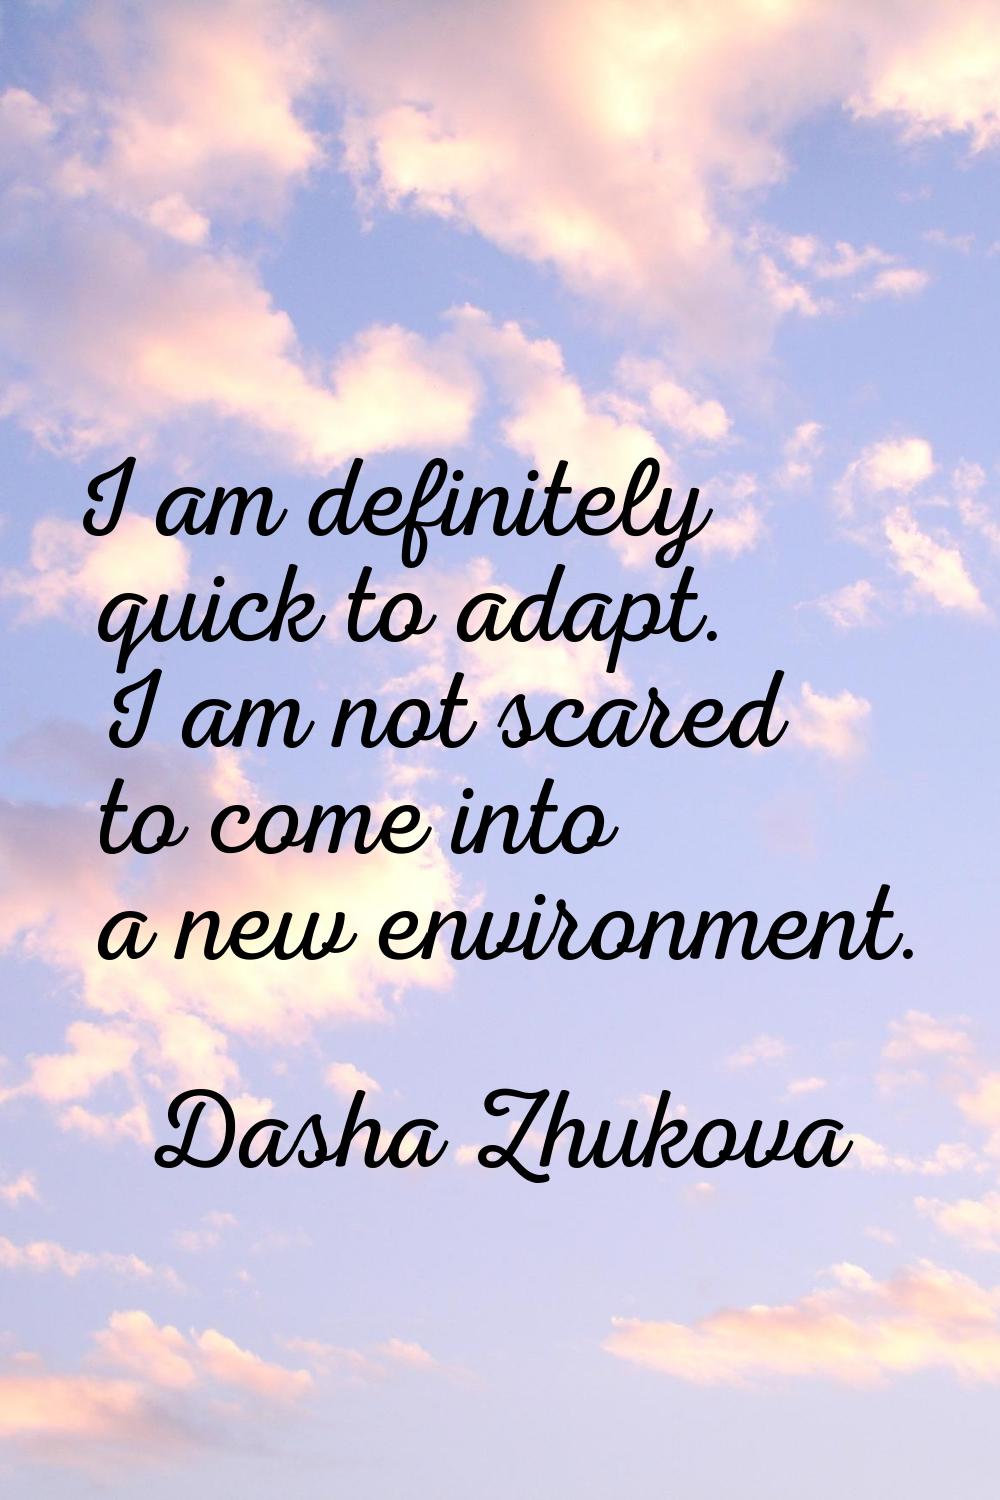 I am definitely quick to adapt. I am not scared to come into a new environment.